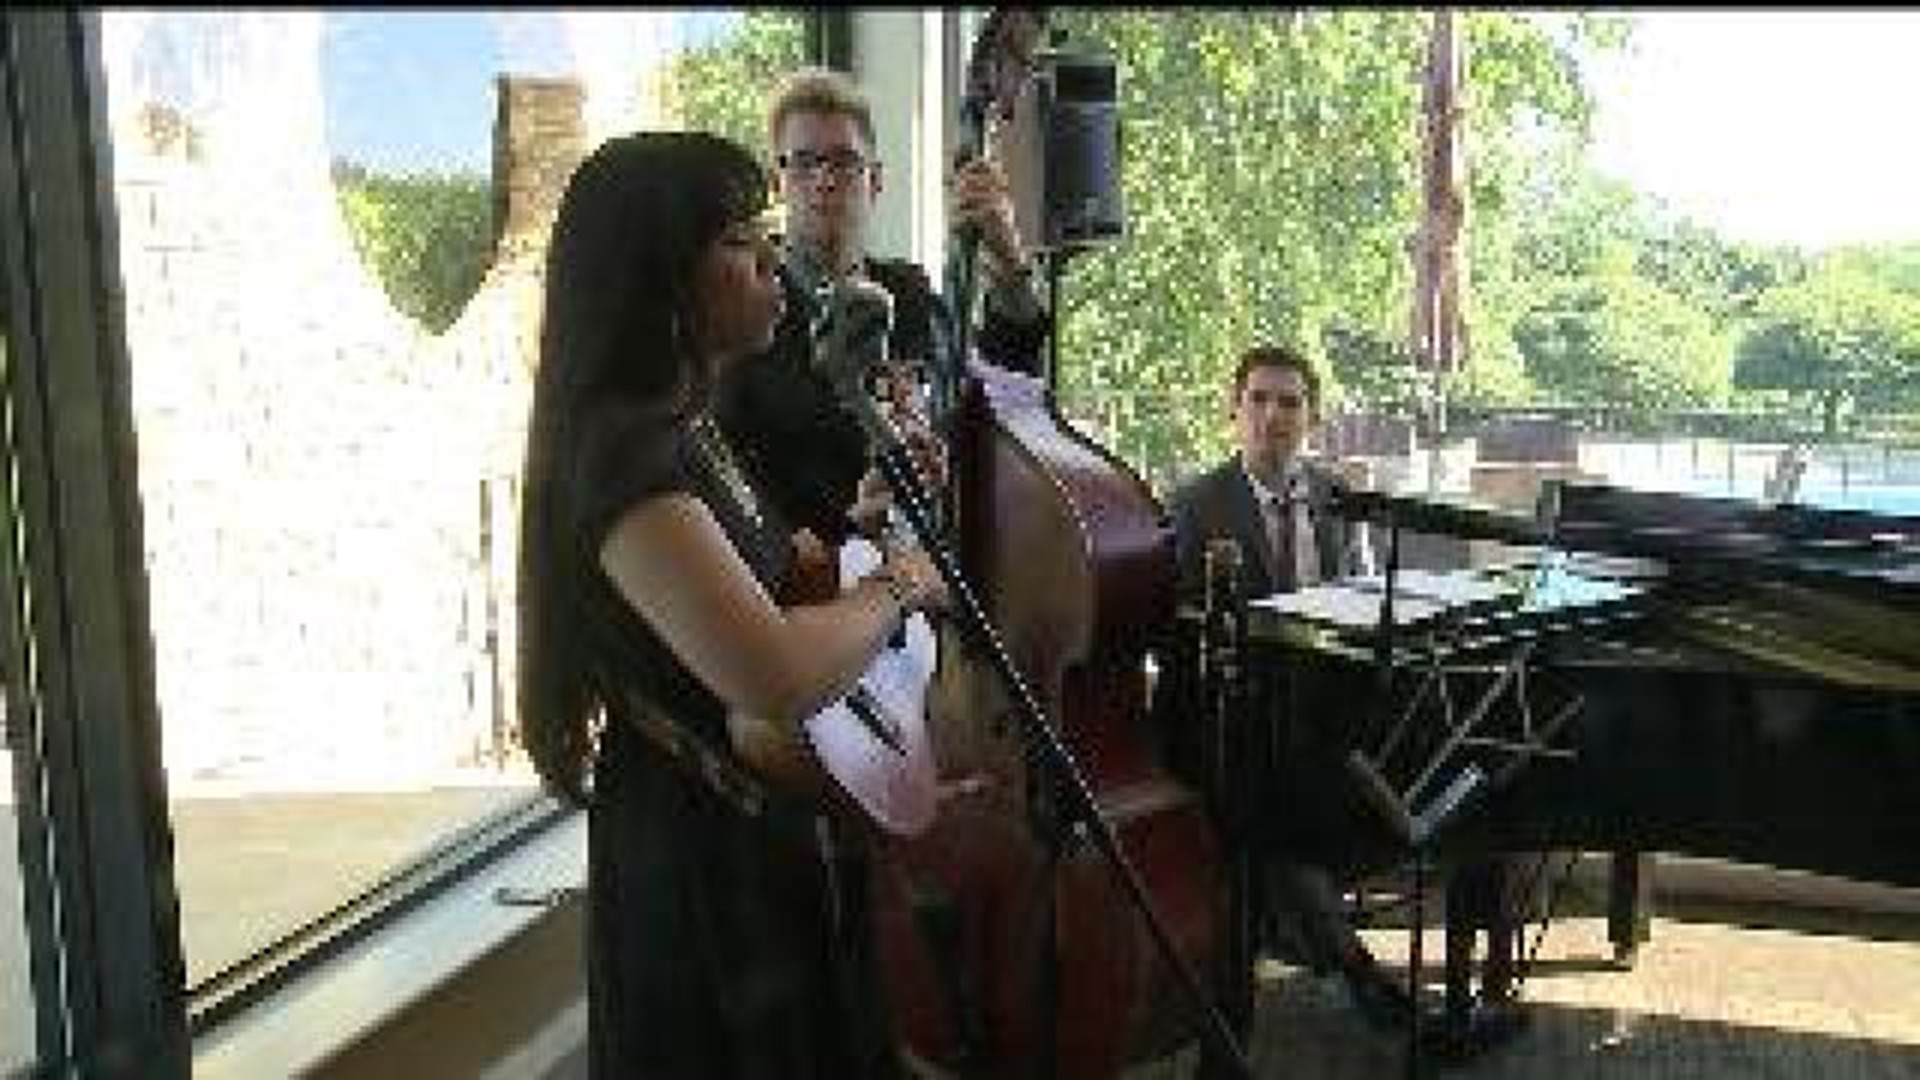 4th Annual Jazz Brunch Helps Local Families